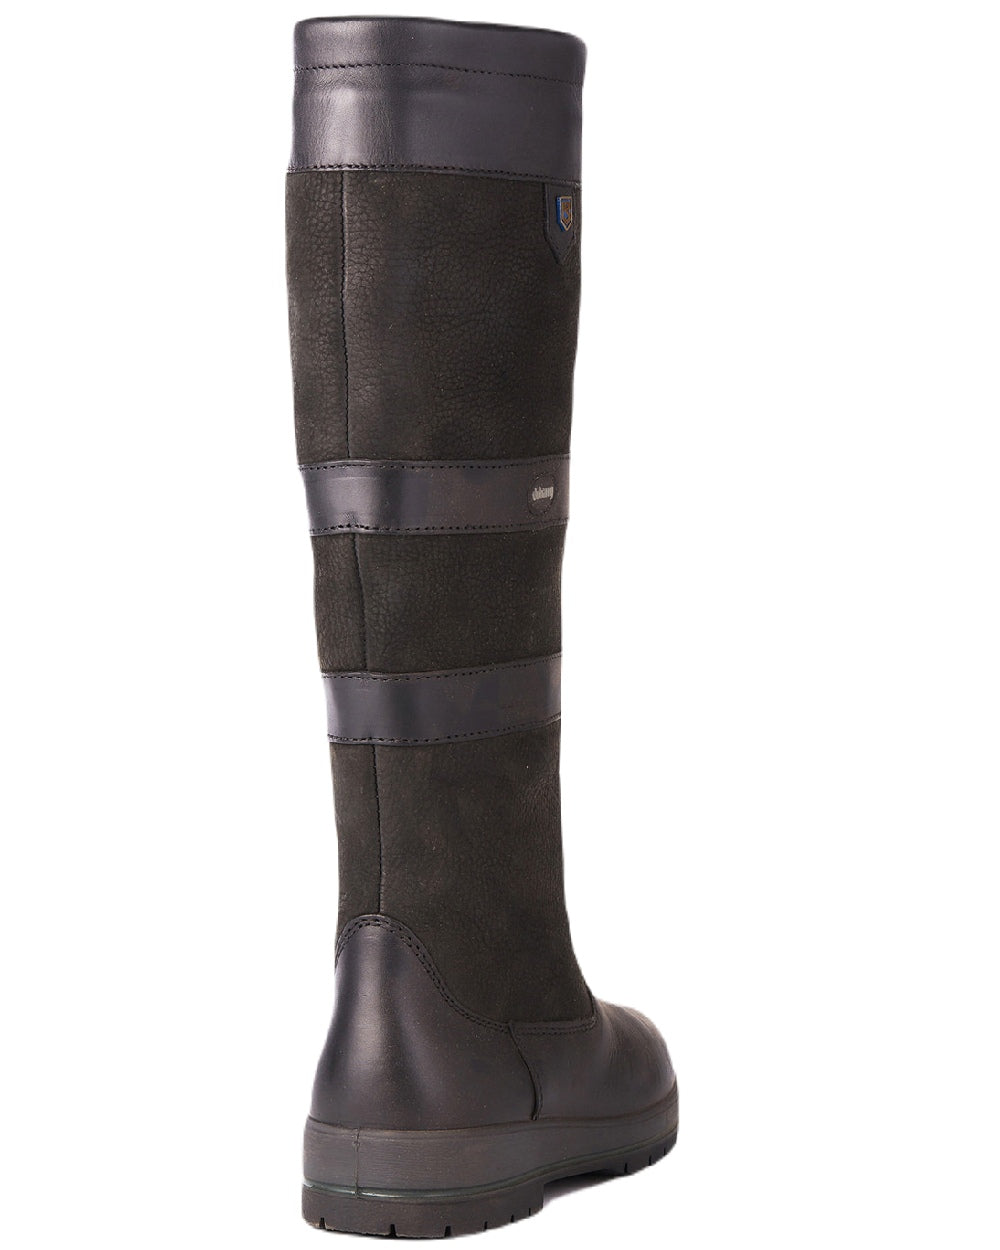 Dubarry Galway Country Boots in Black 